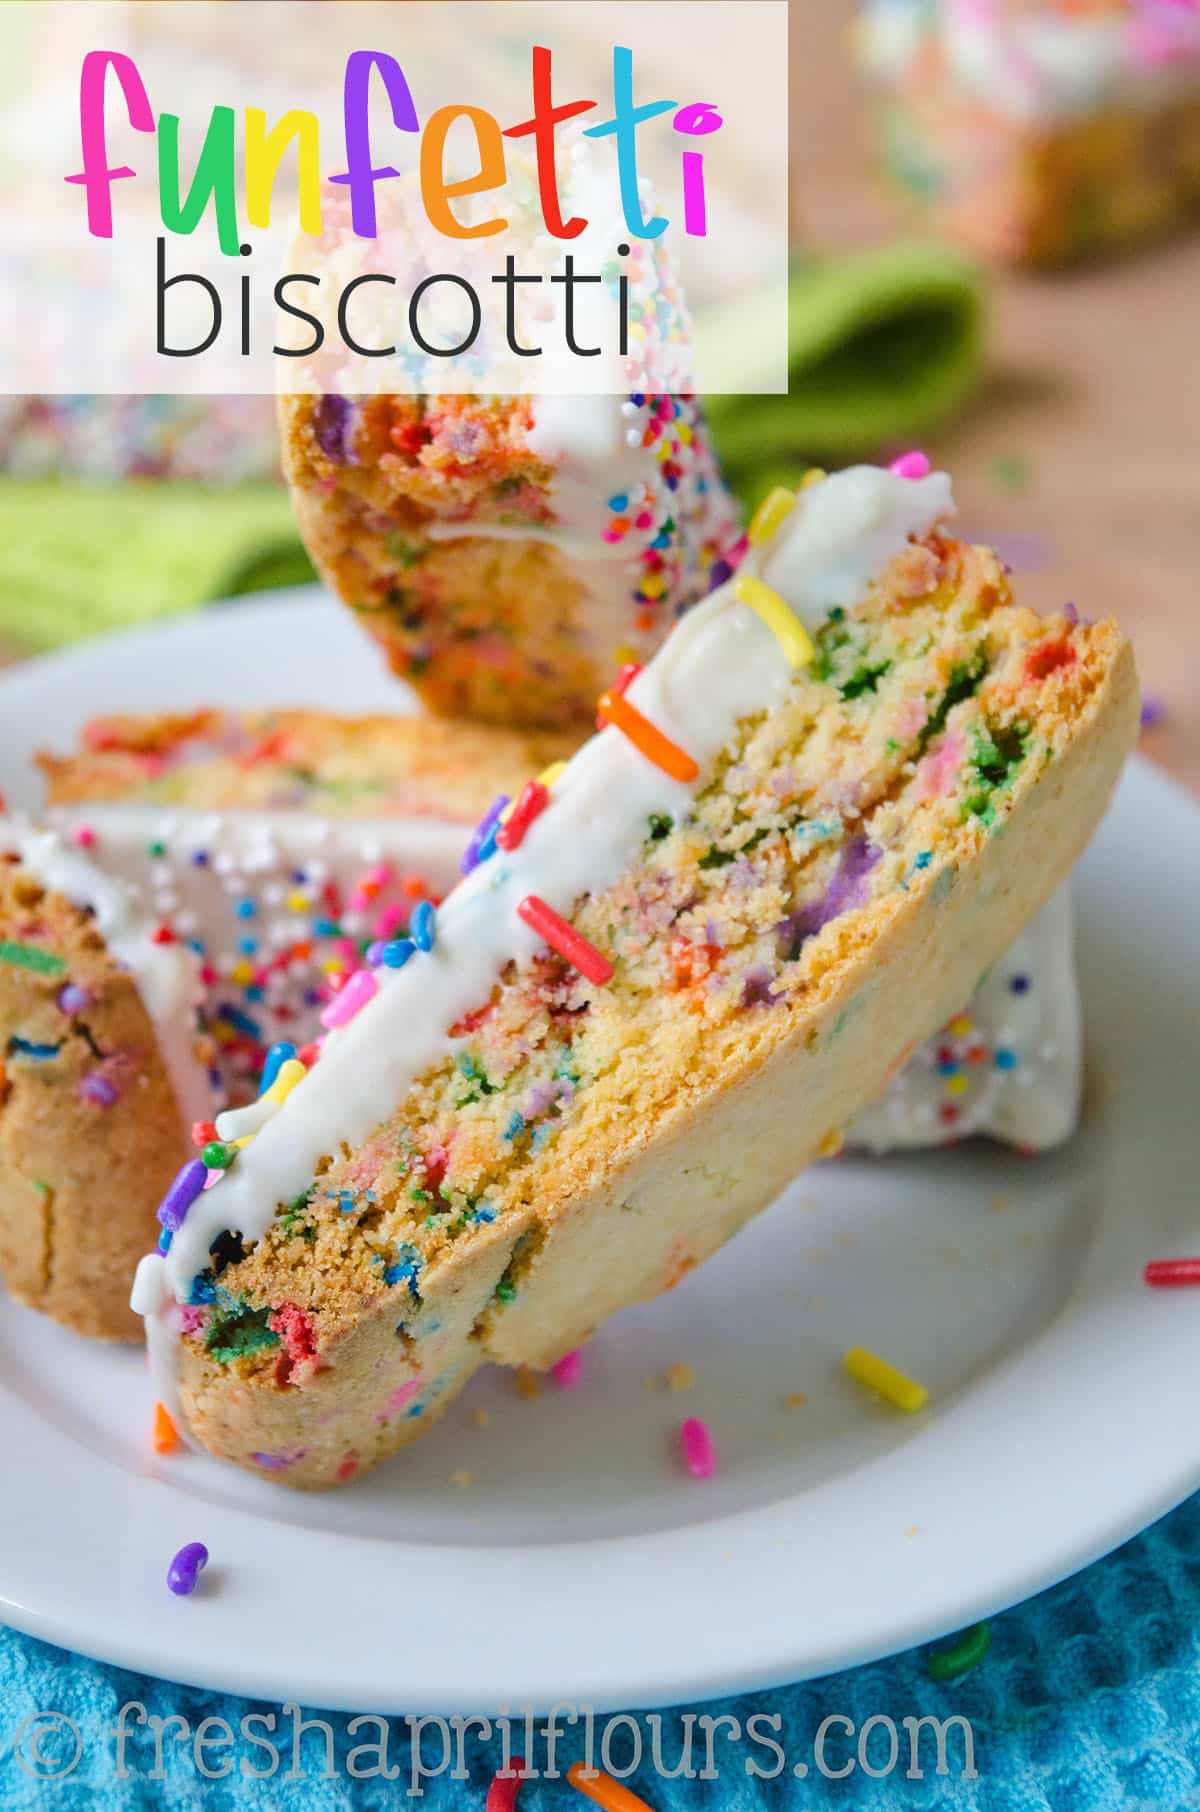 Crunchy biscotti filled with sprinkles and dipped in white chocolate, perfect for dunking in coffee. A party in your mouth and your mug! via @frshaprilflours